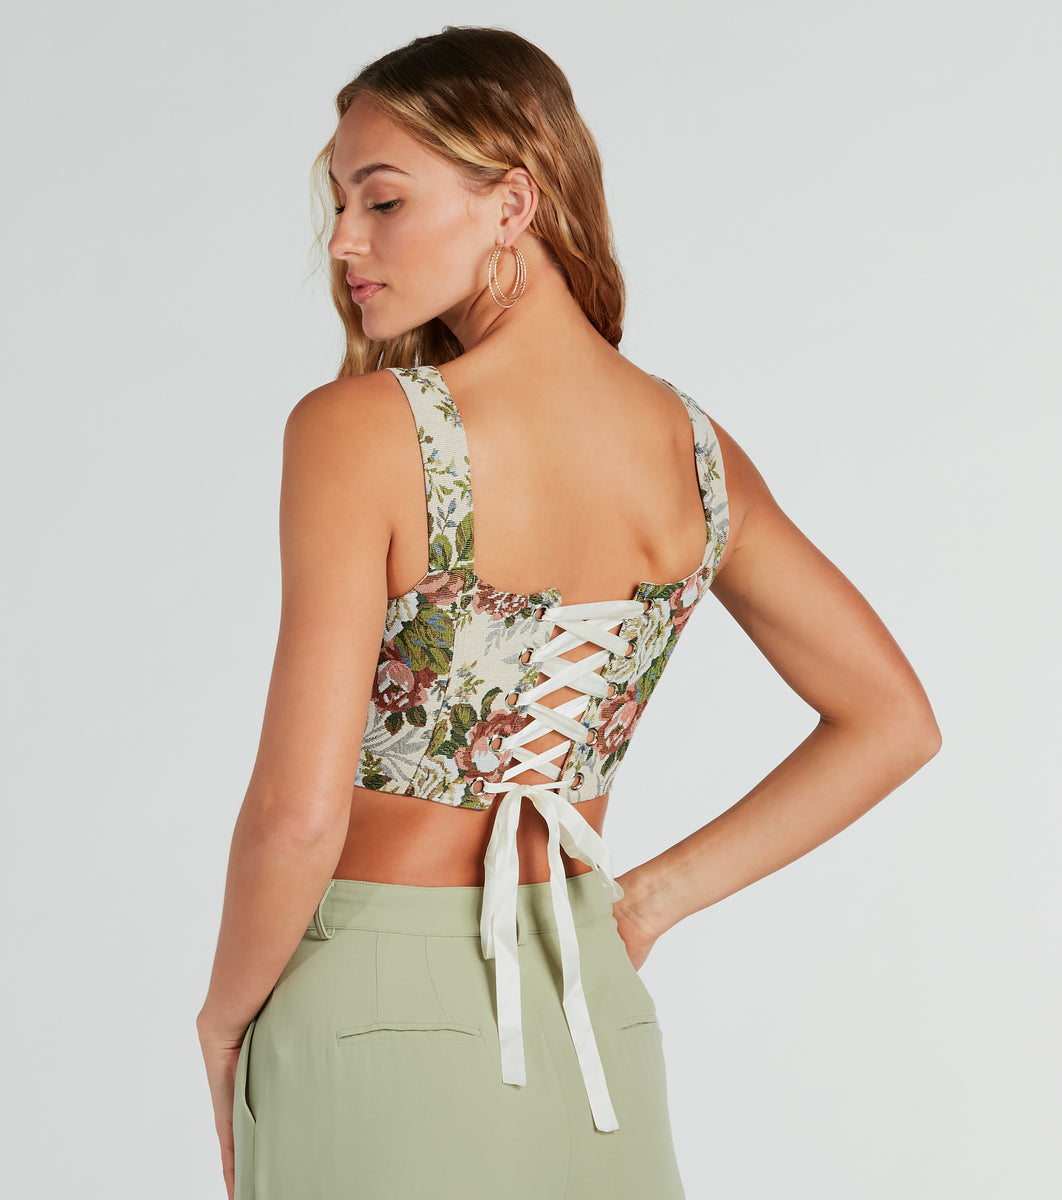 Forever 21 Faux Leather Bustier, $14, Forever 21